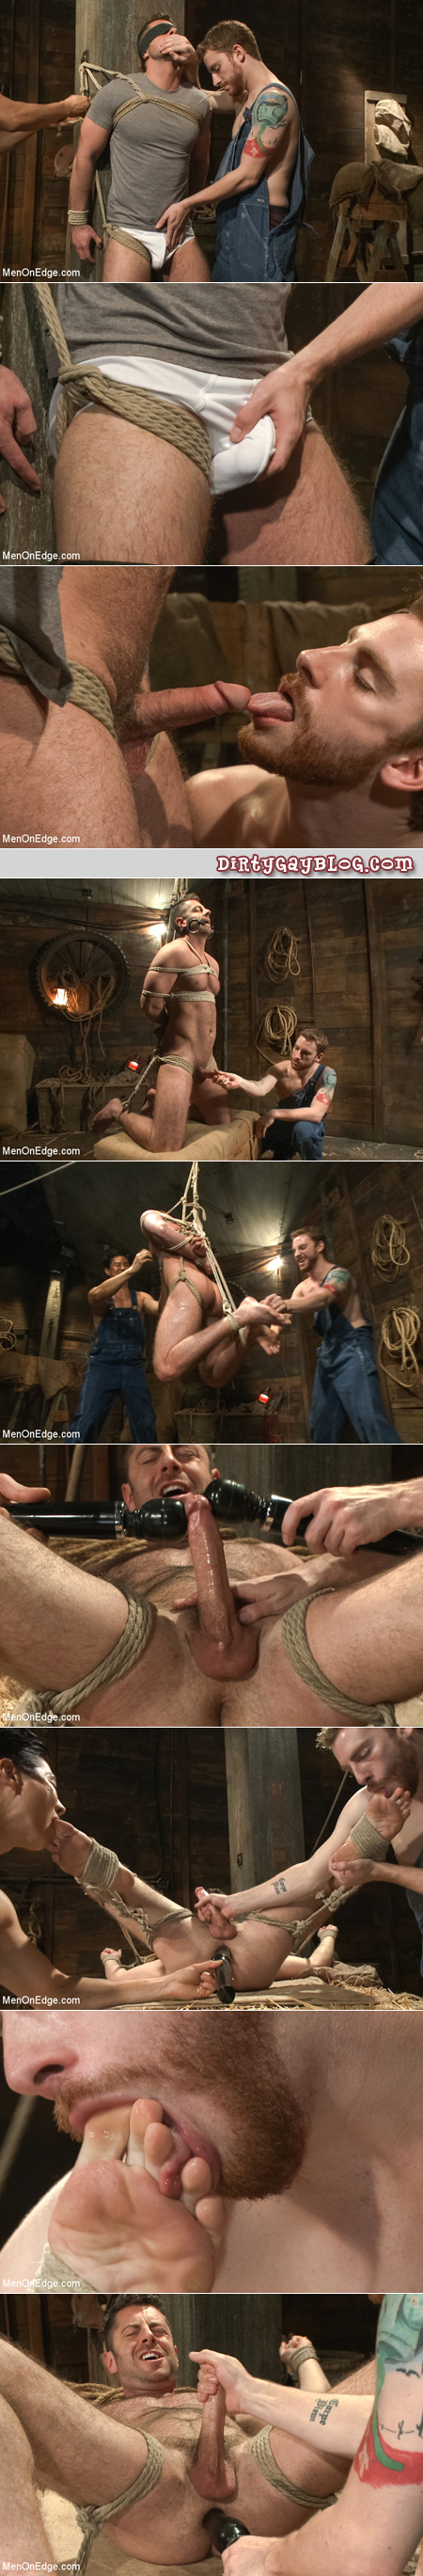 Hairy man is tied up by two male rednecks so they can explore his masculine body with their toys and tongues.